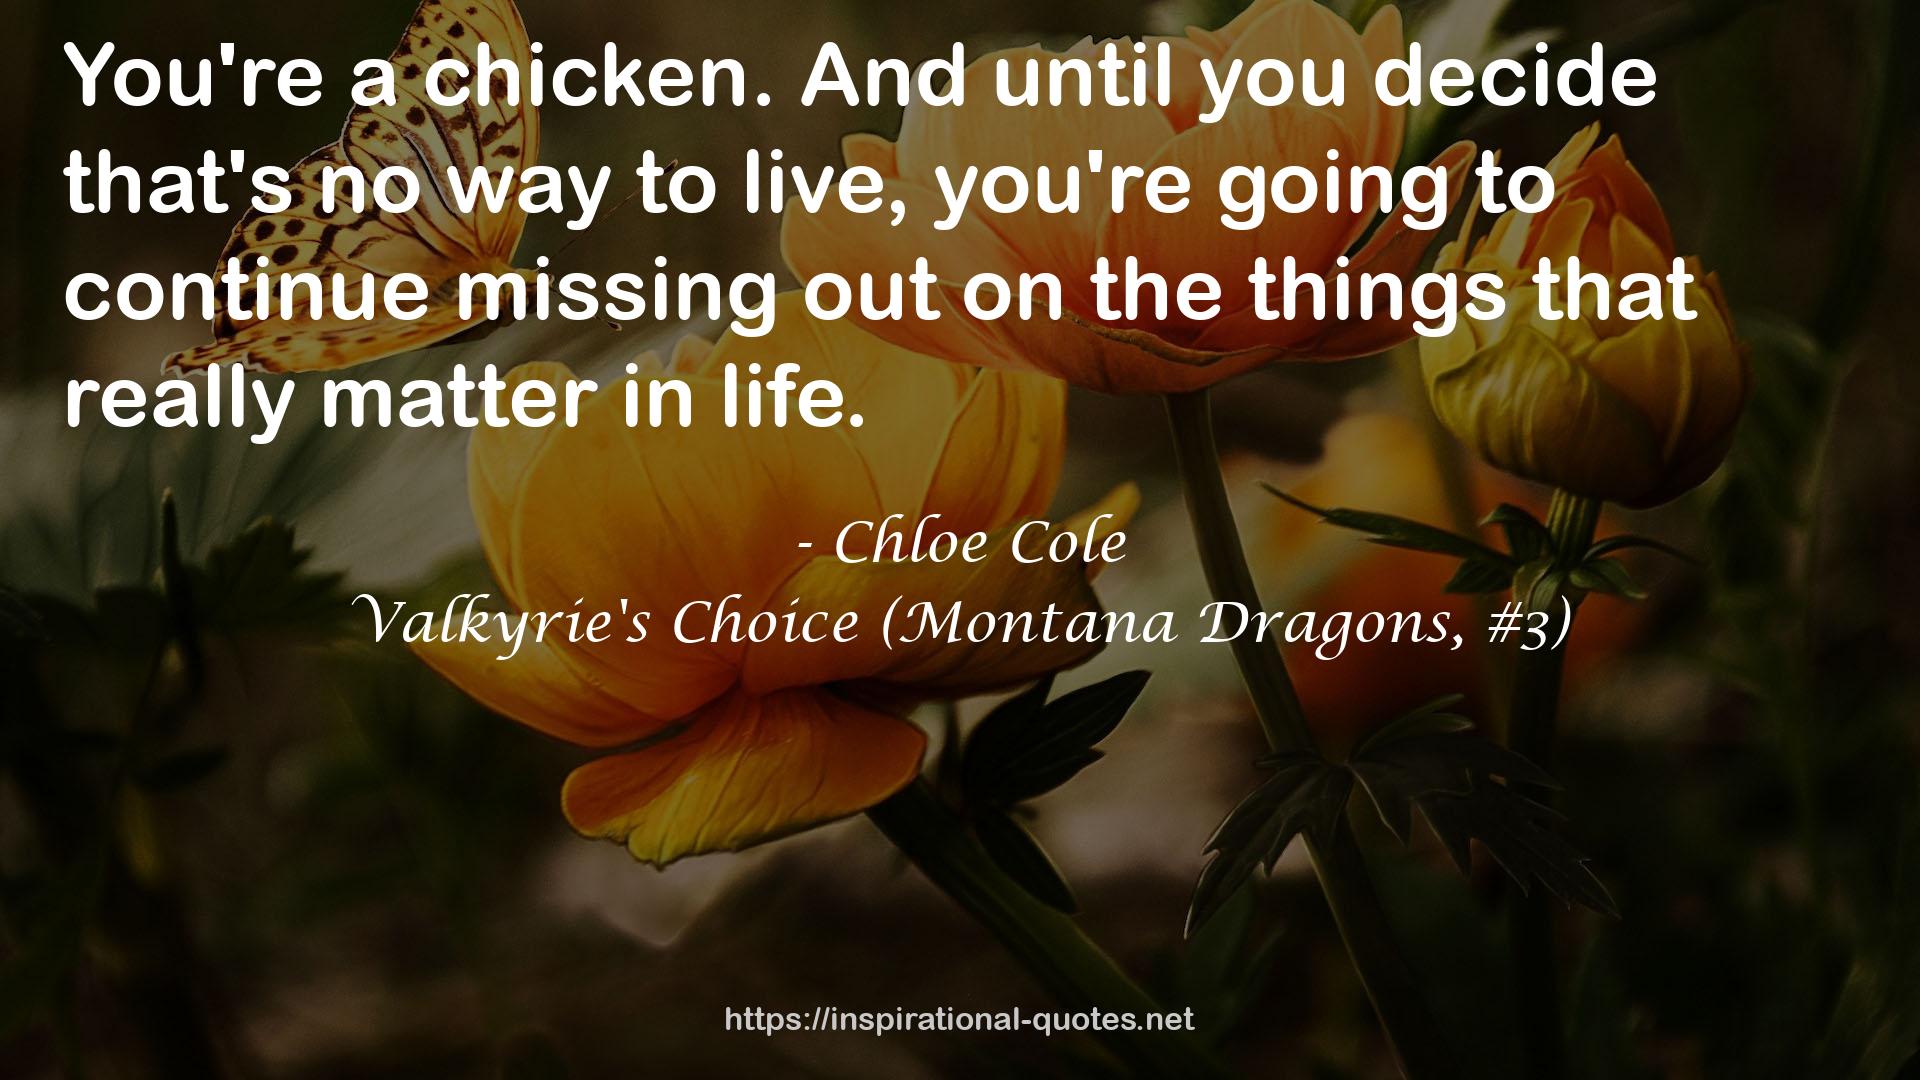 Valkyrie's Choice (Montana Dragons, #3) QUOTES